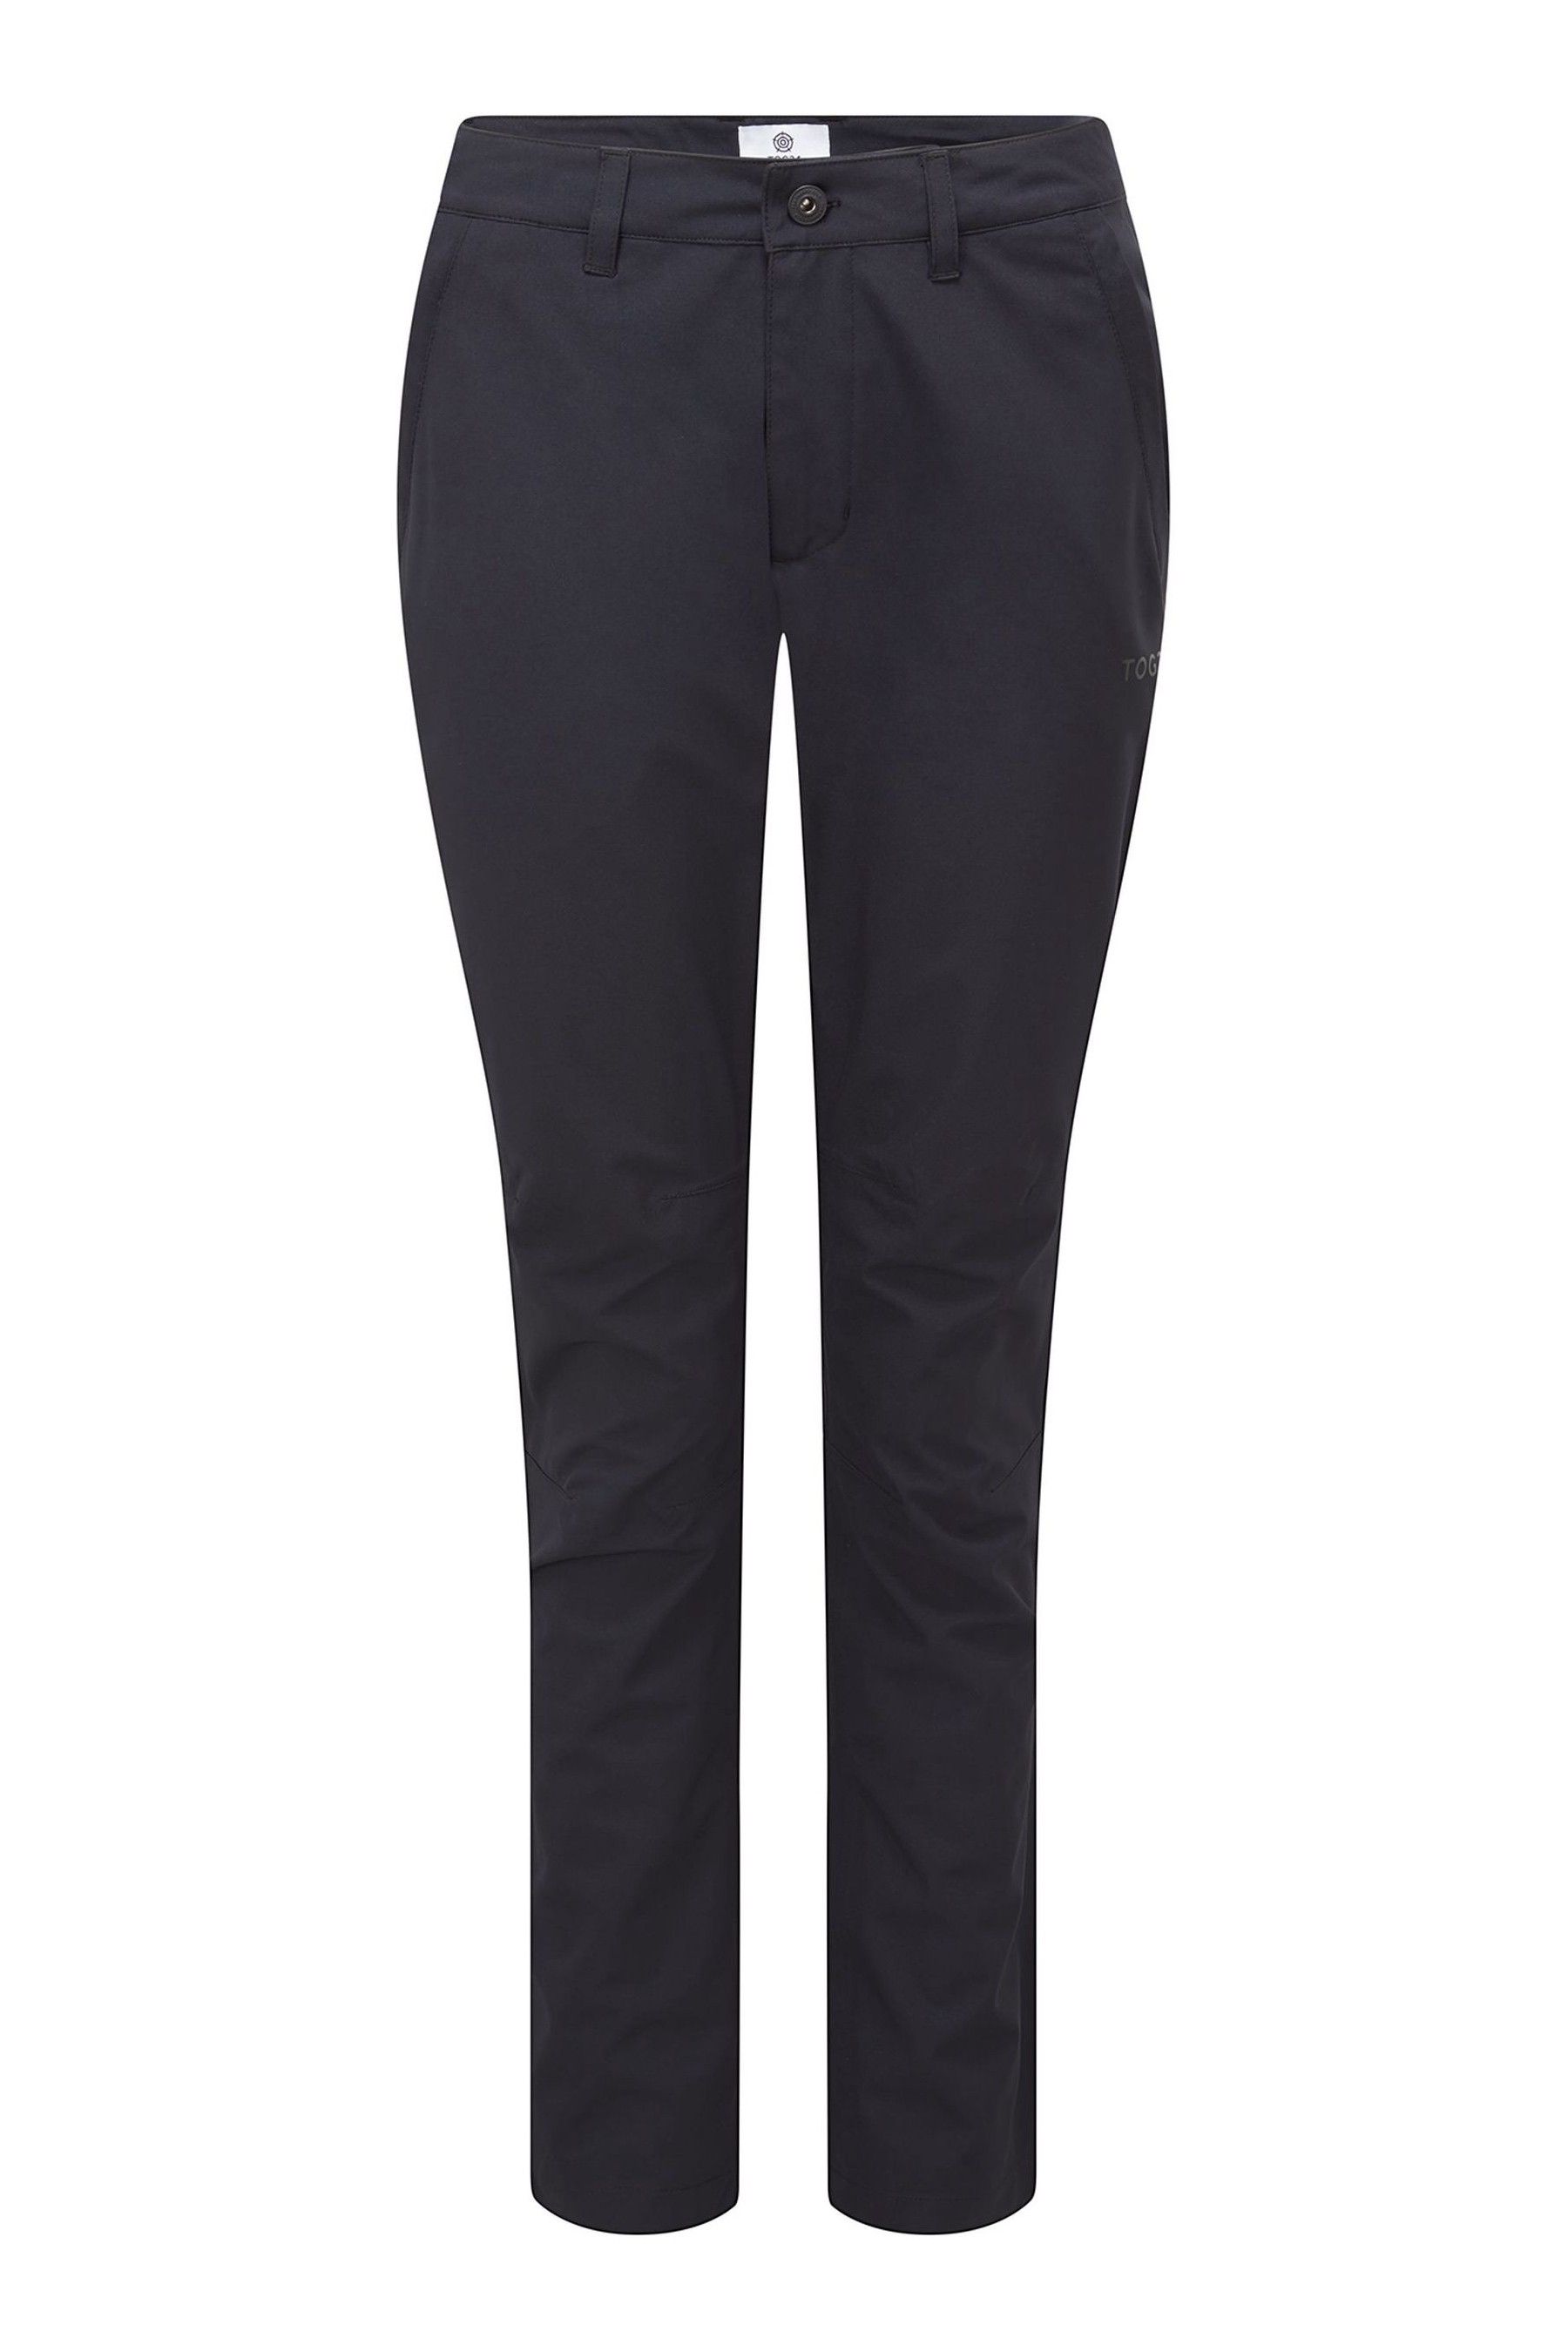 Buy Tog 24 Womens Black Silsden Waterproof Trousers from the Next UK ...